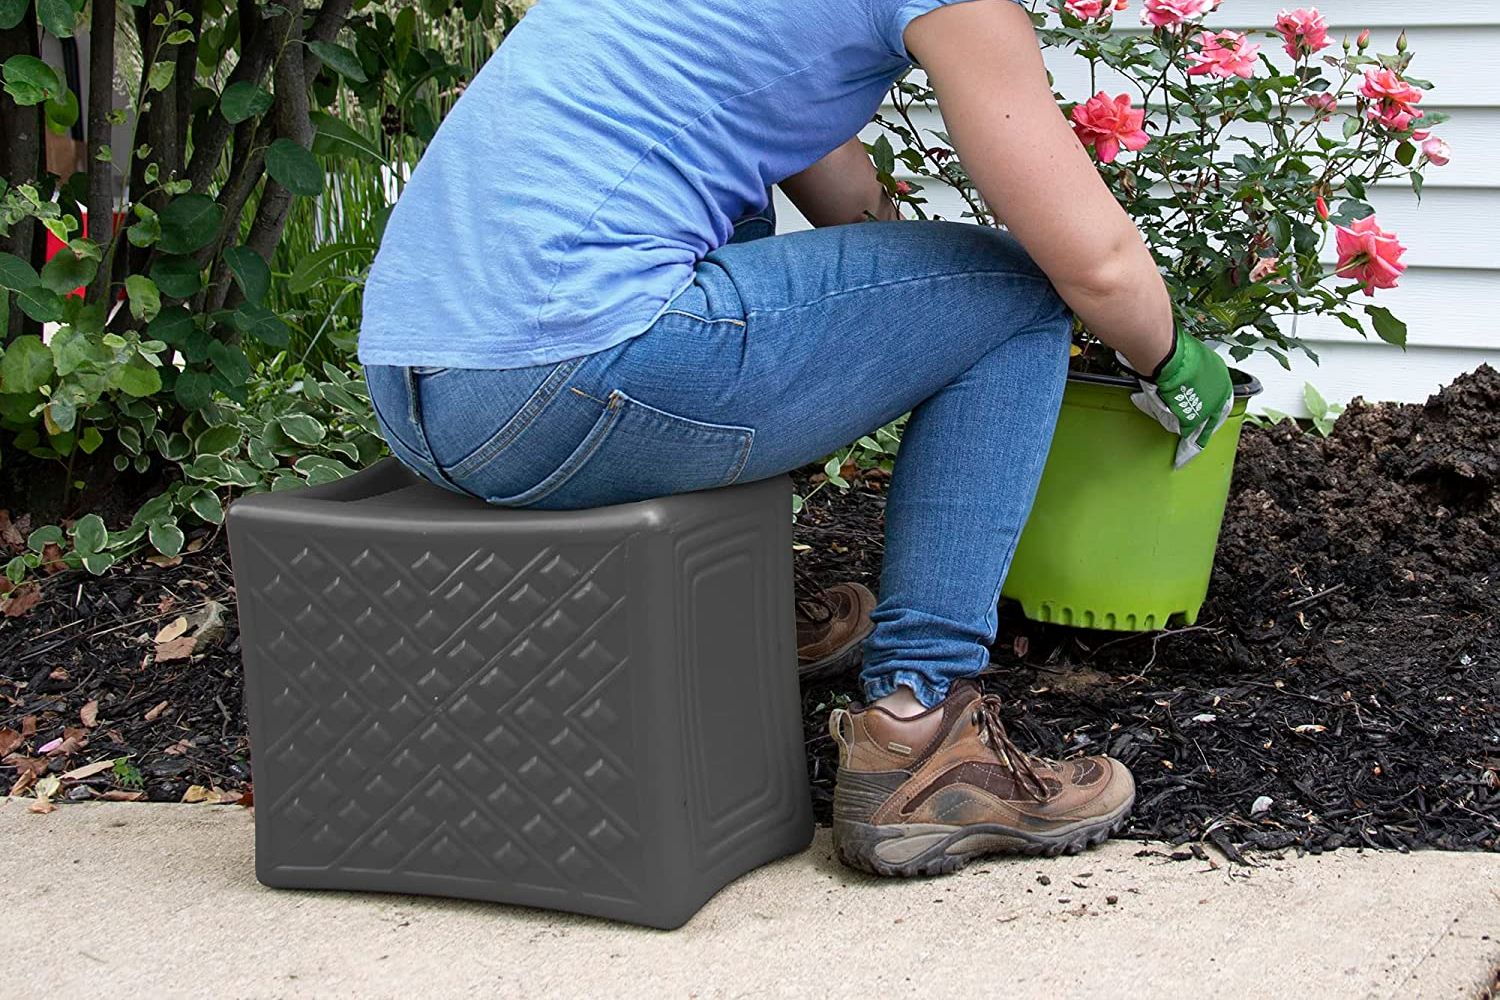 A person seated on the best gardening stool option while leaning over to pick up a large potted plant